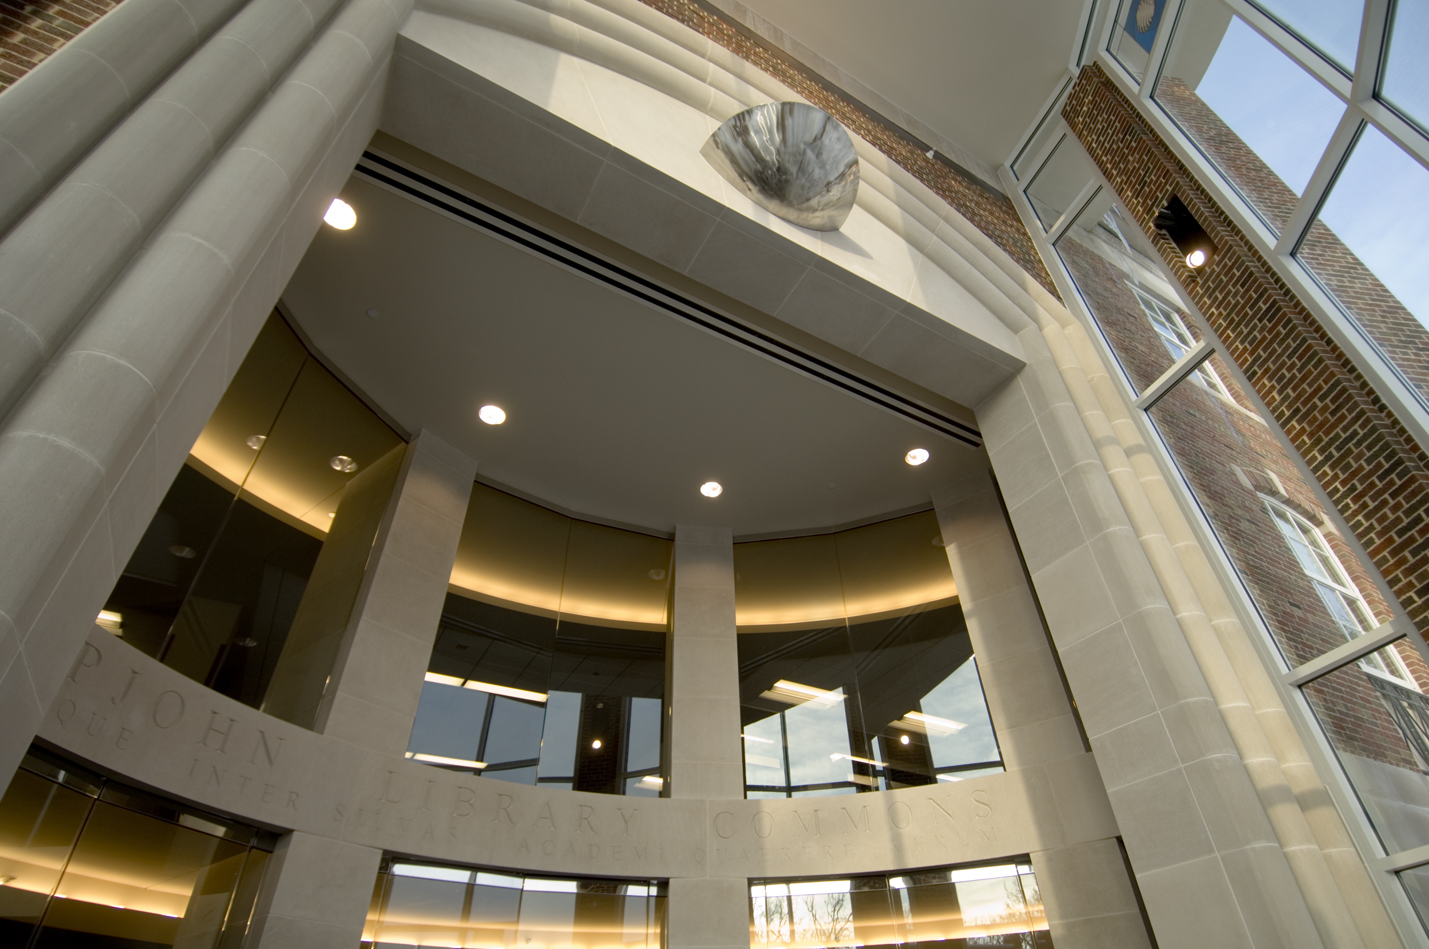 Photo of the Upjohn Library Commons entrance